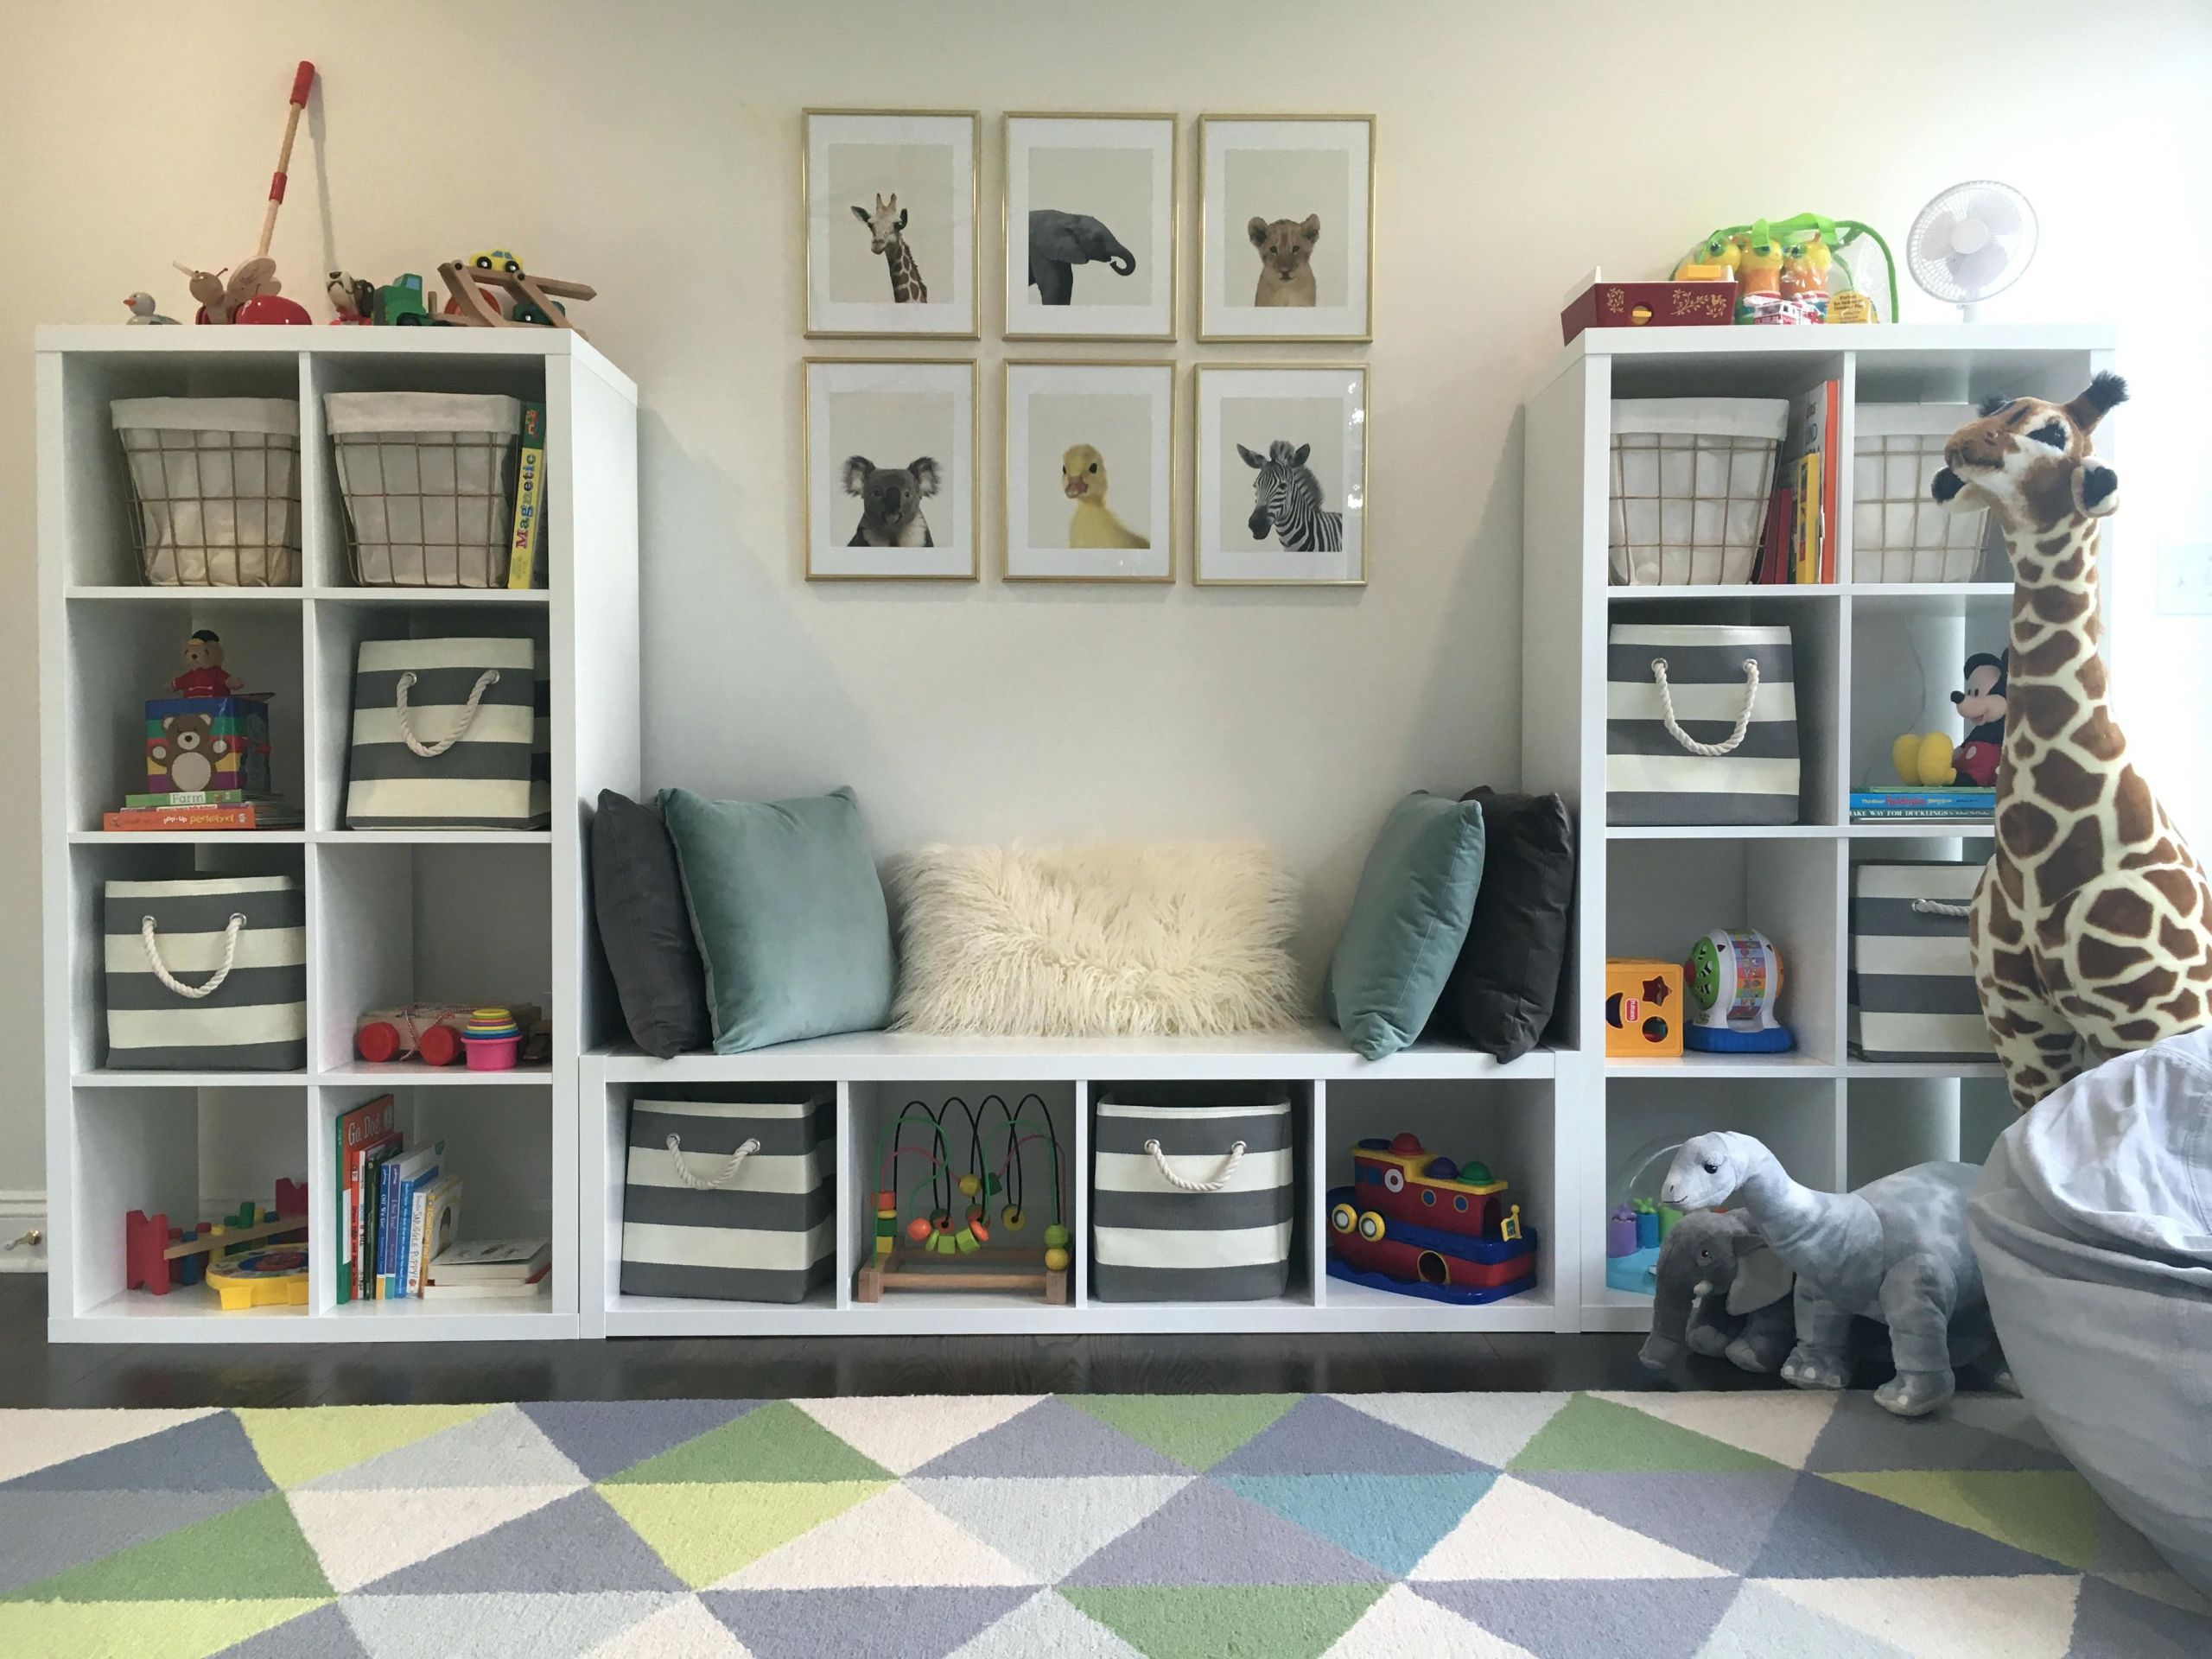 Storage Units For Kids Room
 Image result for ikea trofast playroom in 2019